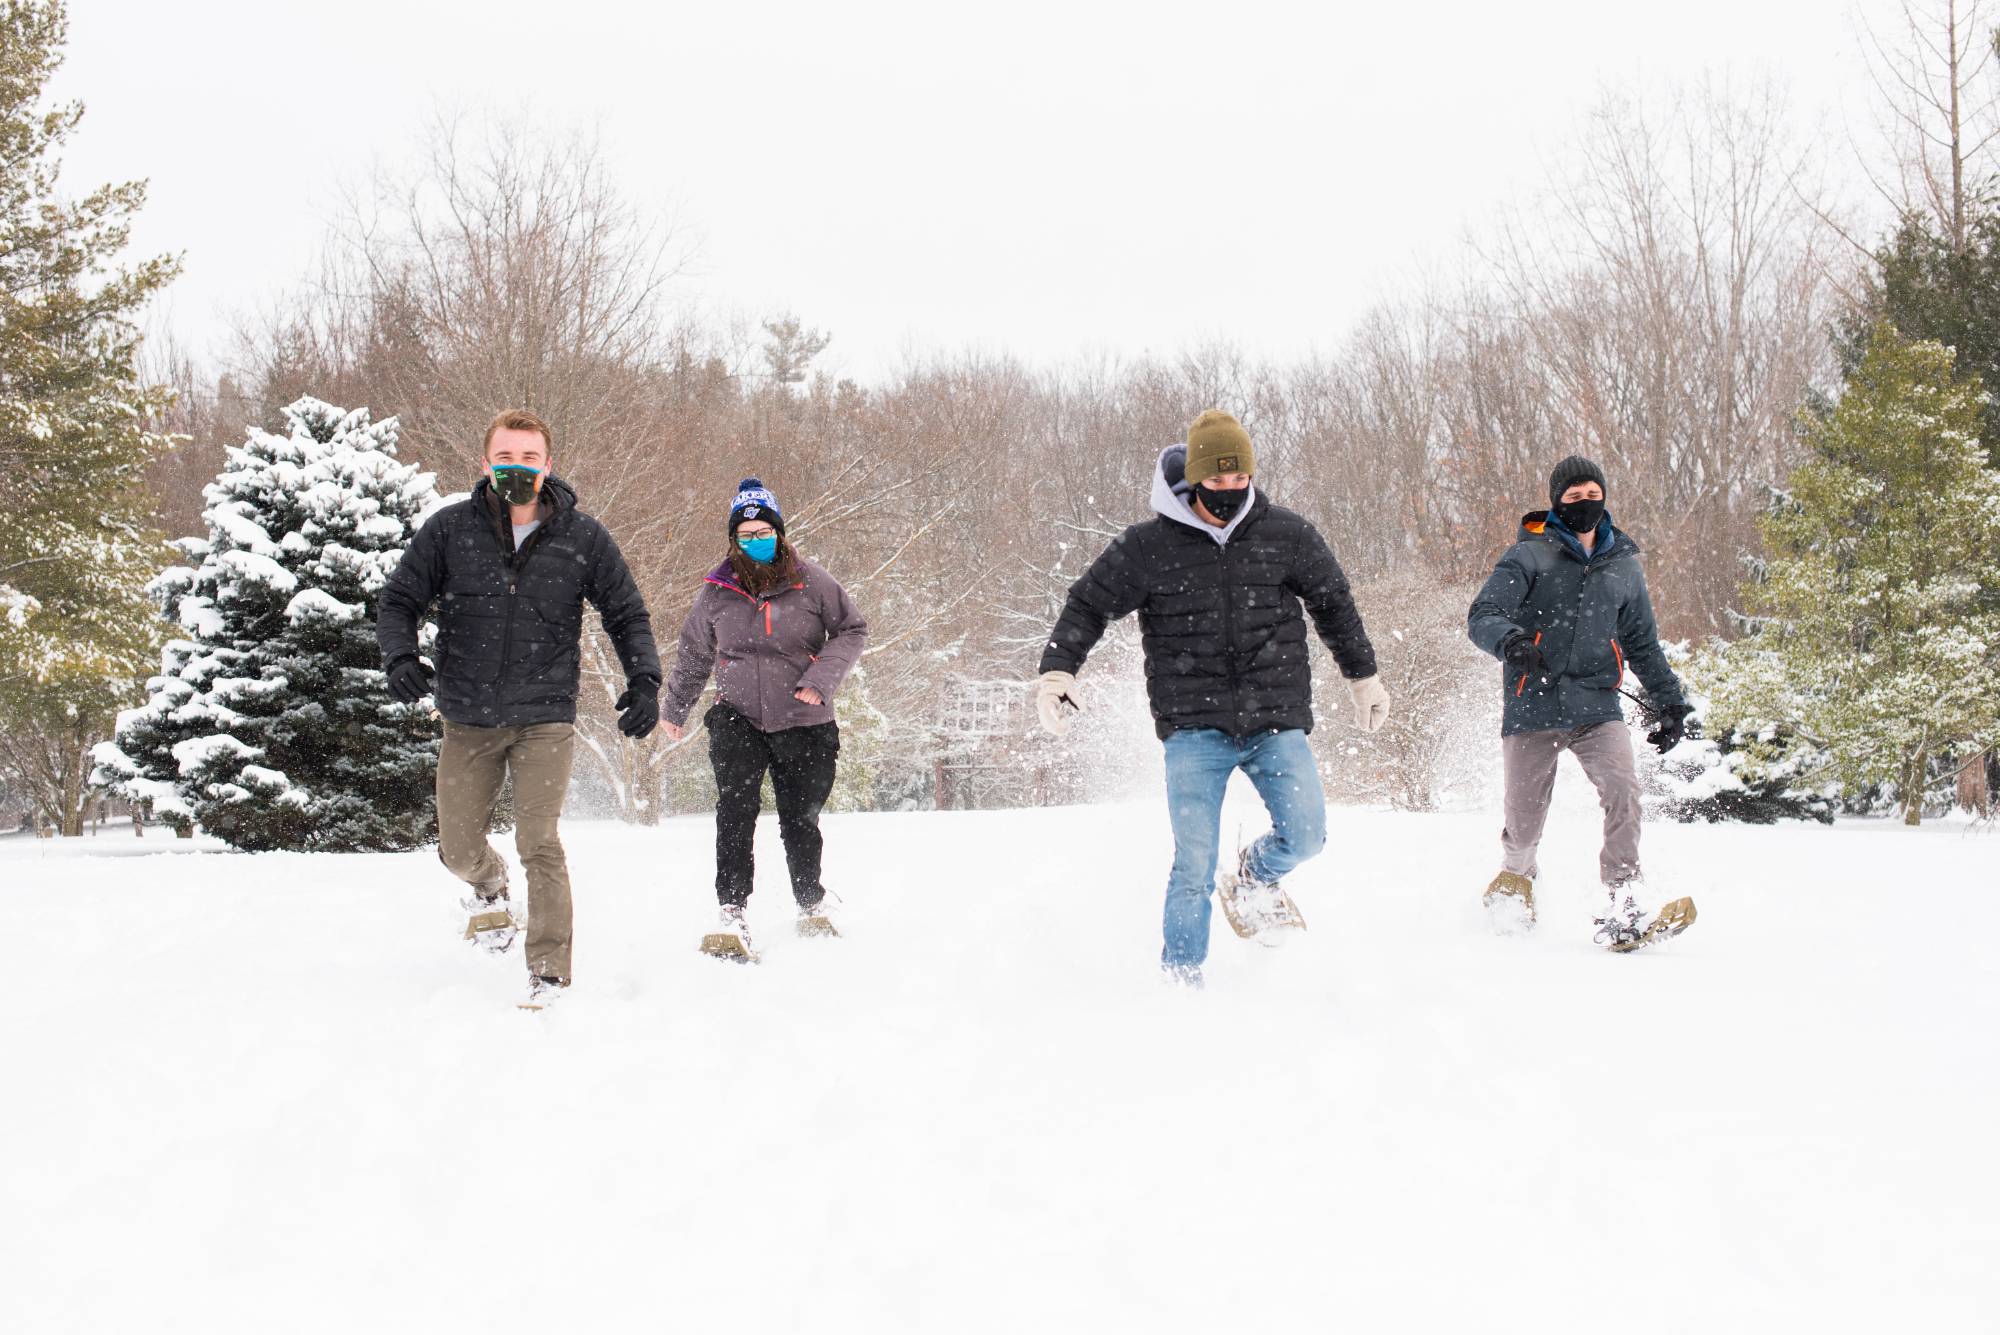 Image of 4 students wearing masks in the snowy outdoors with snow shoes on walking towards the foreground.